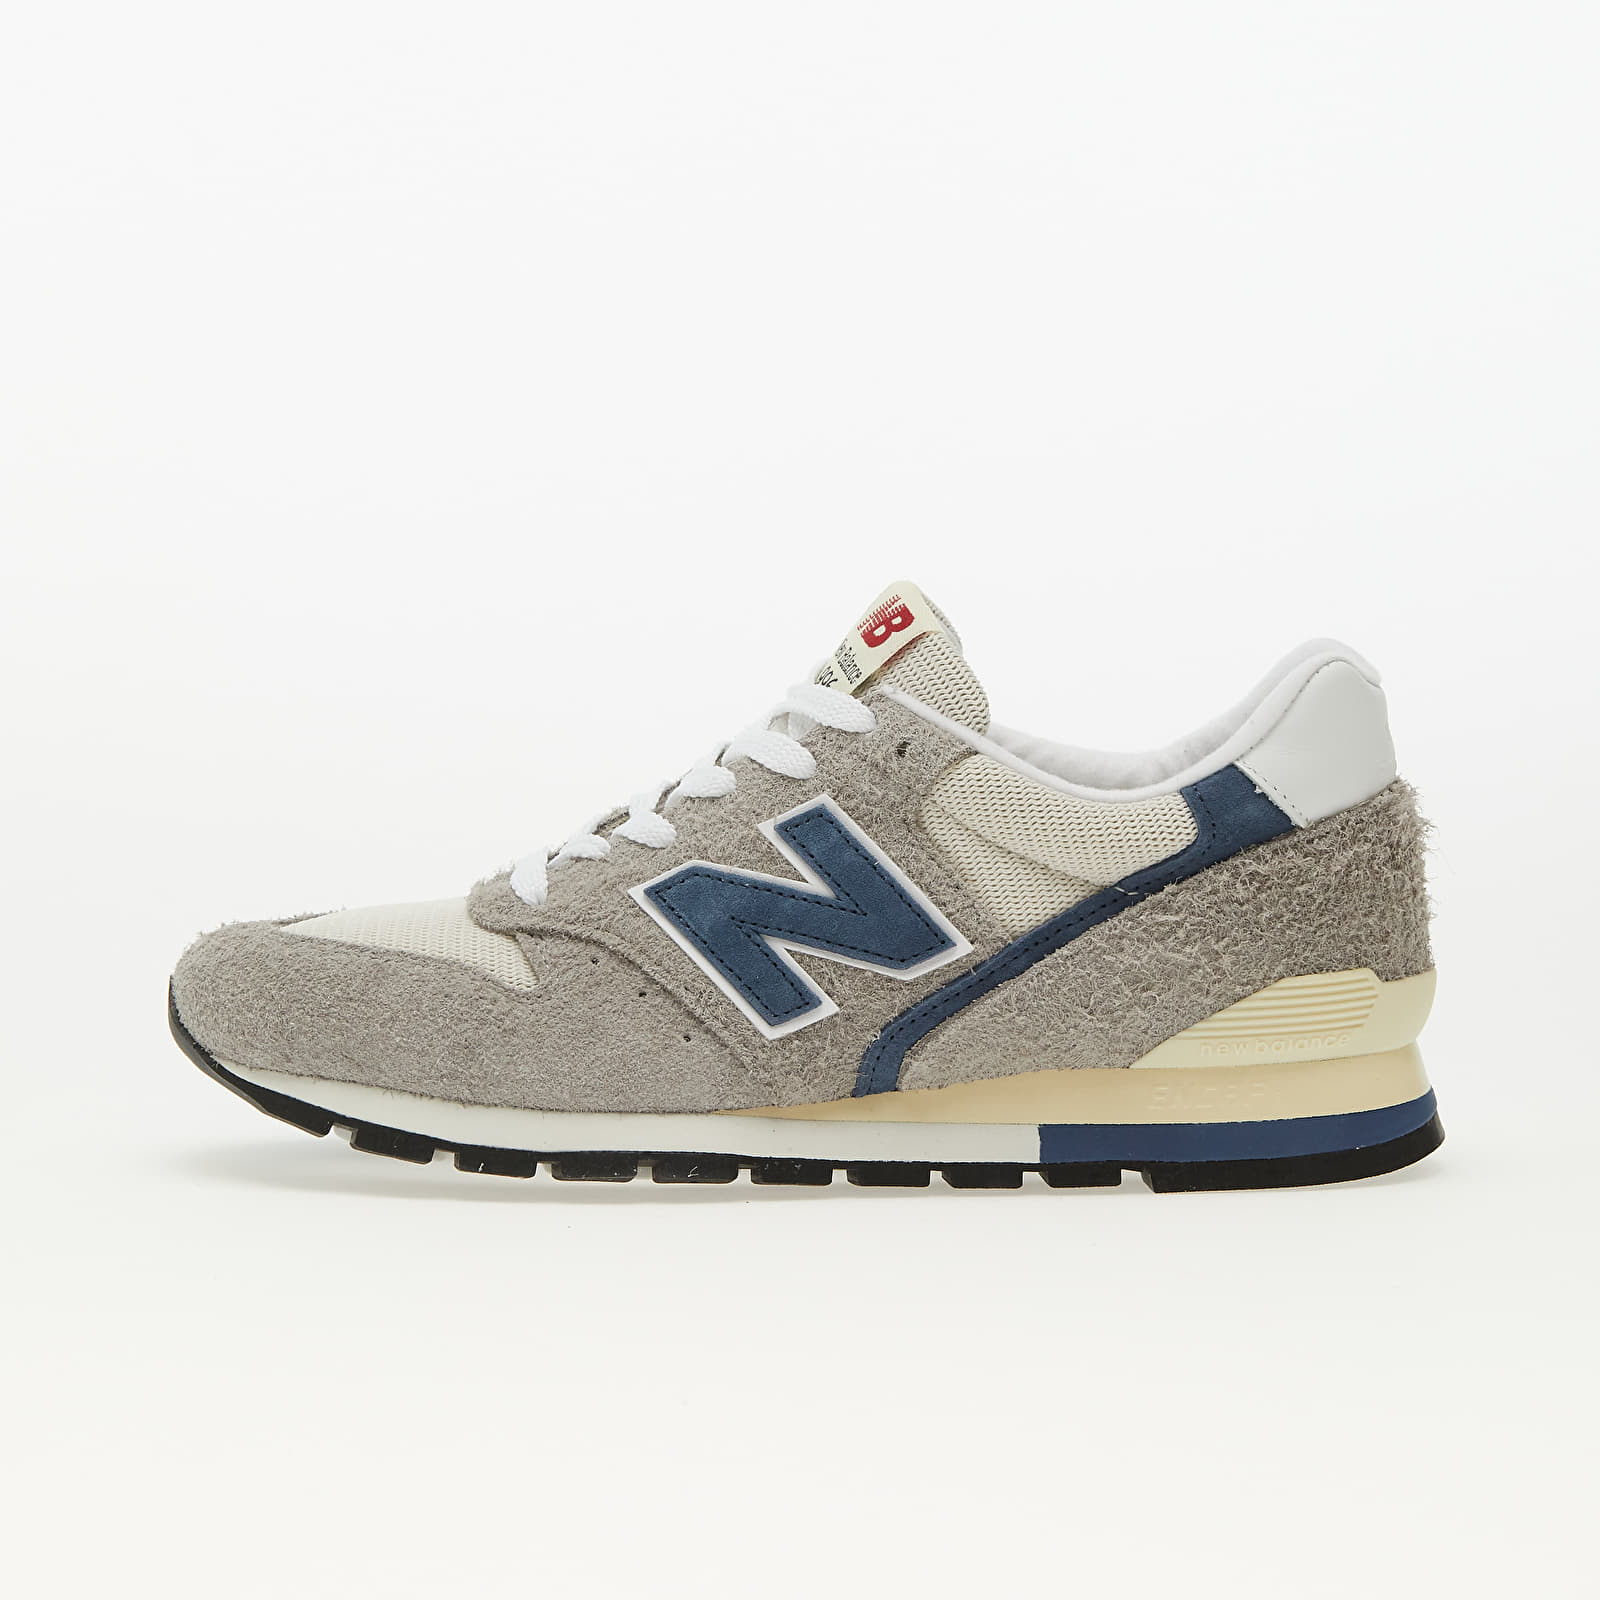 Chaussures et baskets homme New Balance 996 Grey